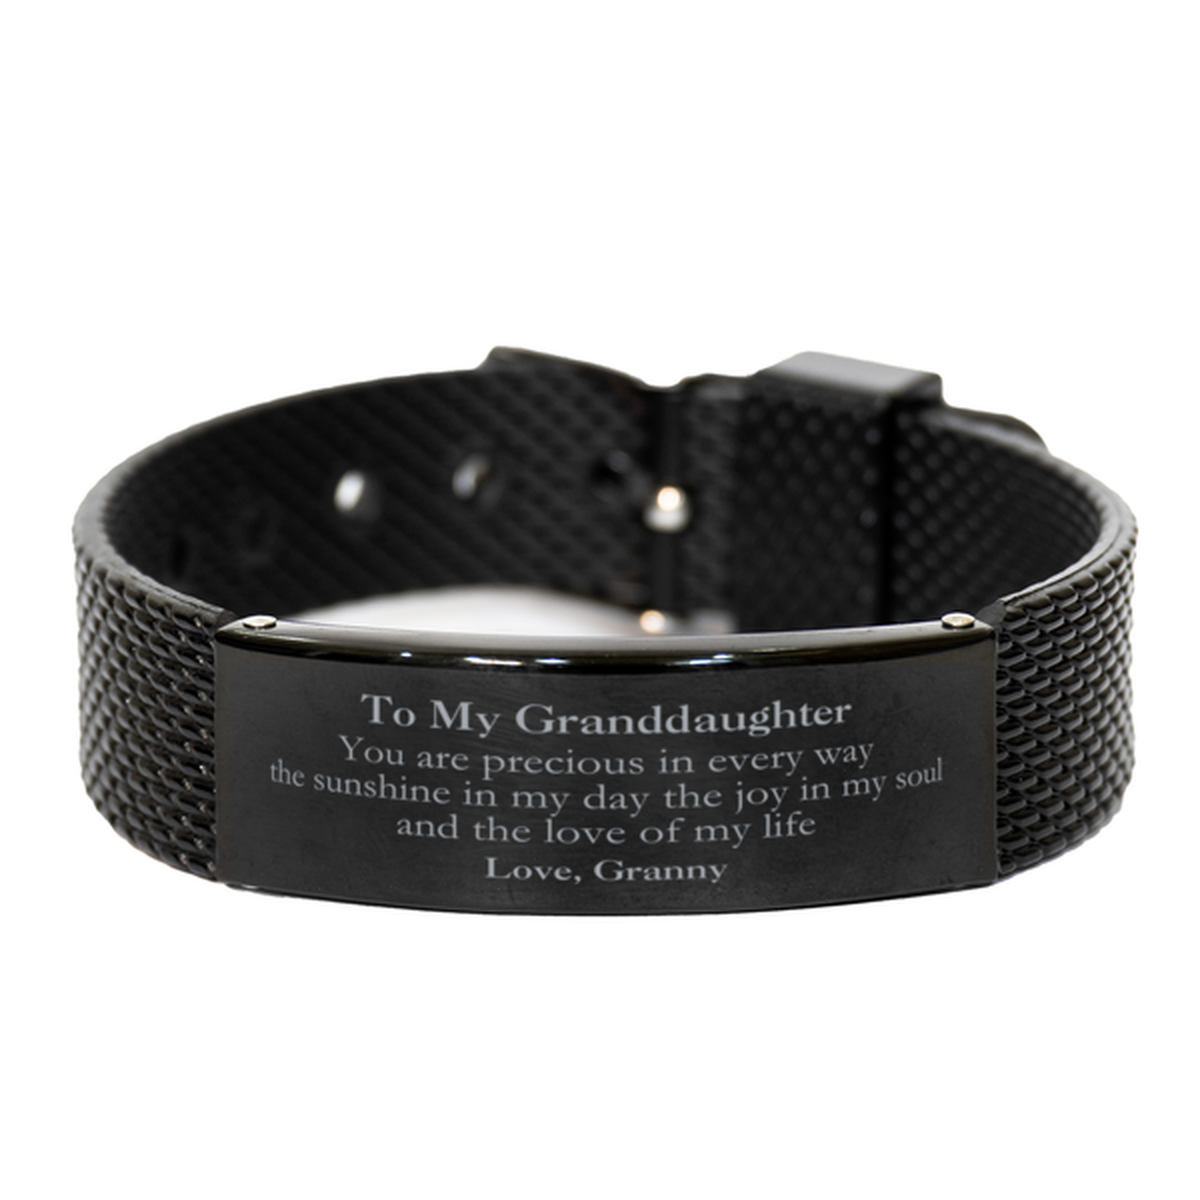 Graduation Gifts for Granddaughter Black Shark Mesh Bracelet Present from Granny, Christmas Granddaughter Birthday Gifts Granddaughter You are precious in every way the sunshine in my day. Love, Granny